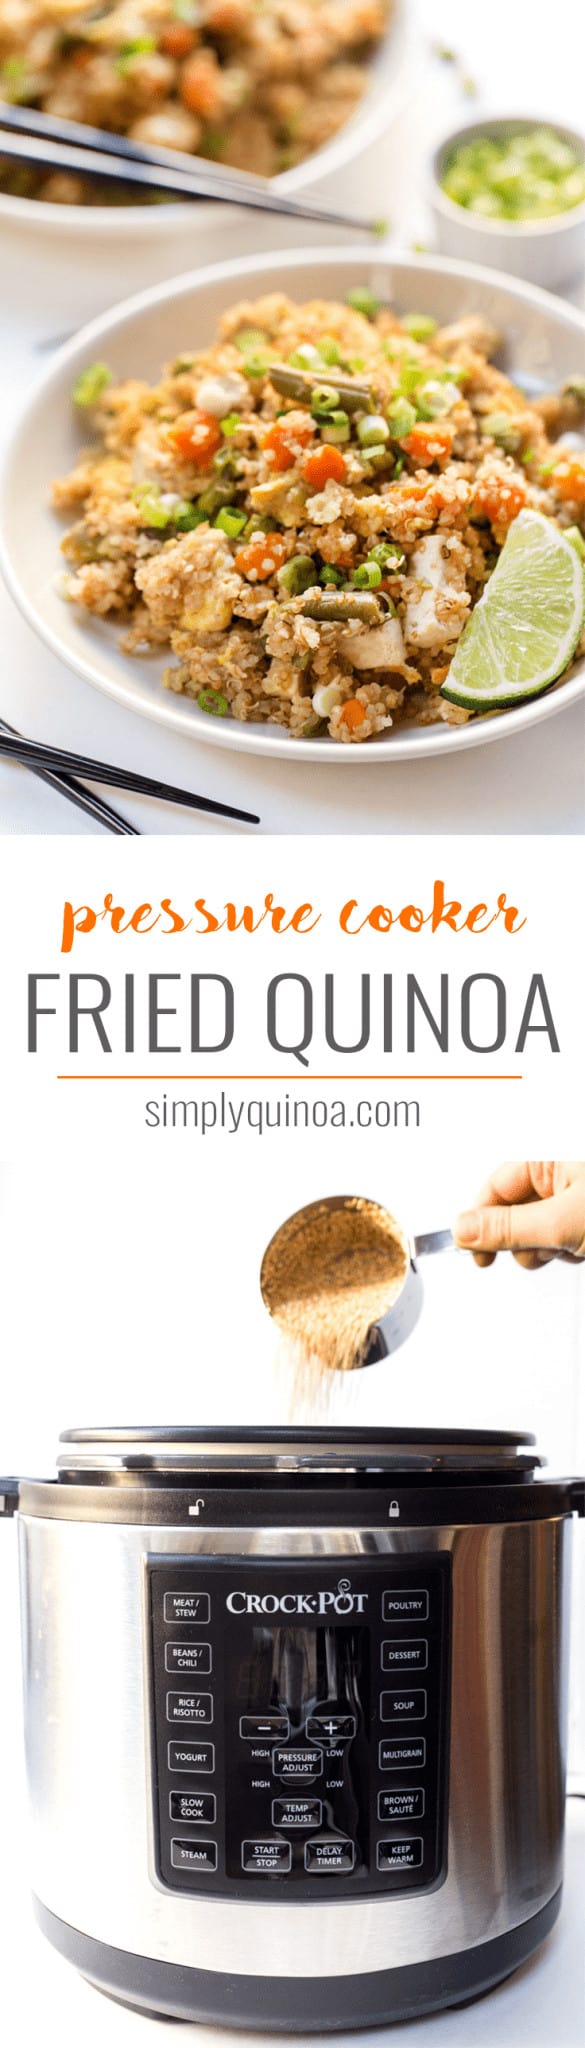 how to make fried quinoa in the pressure cooker